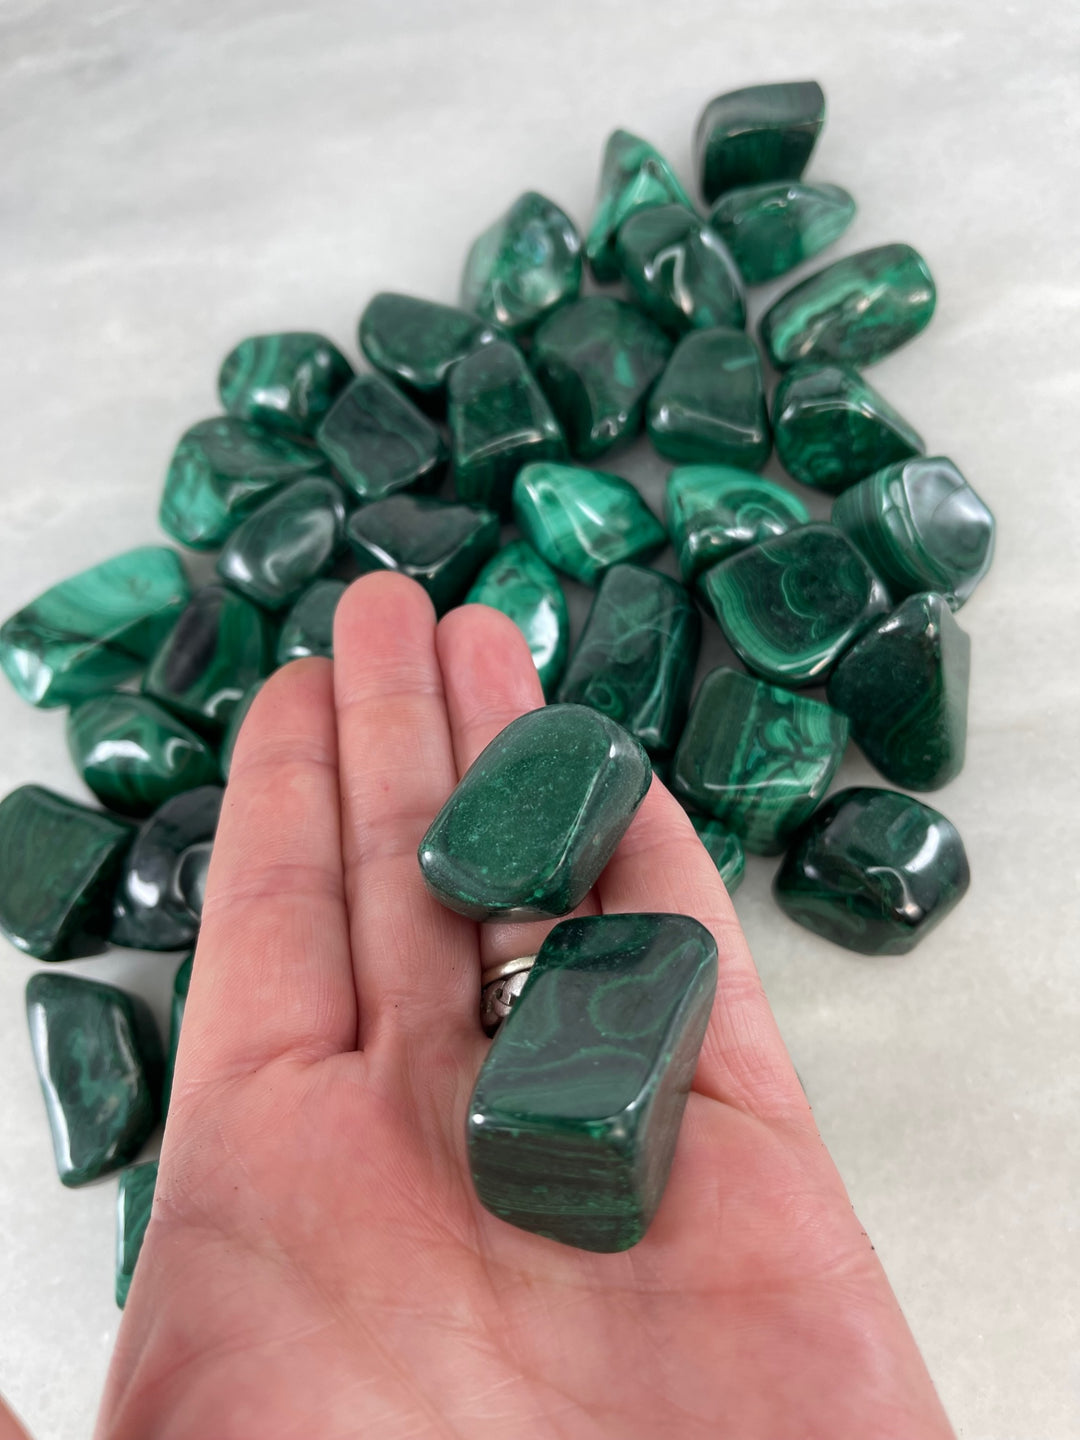 Malachite Tumblers in the palm of a hand